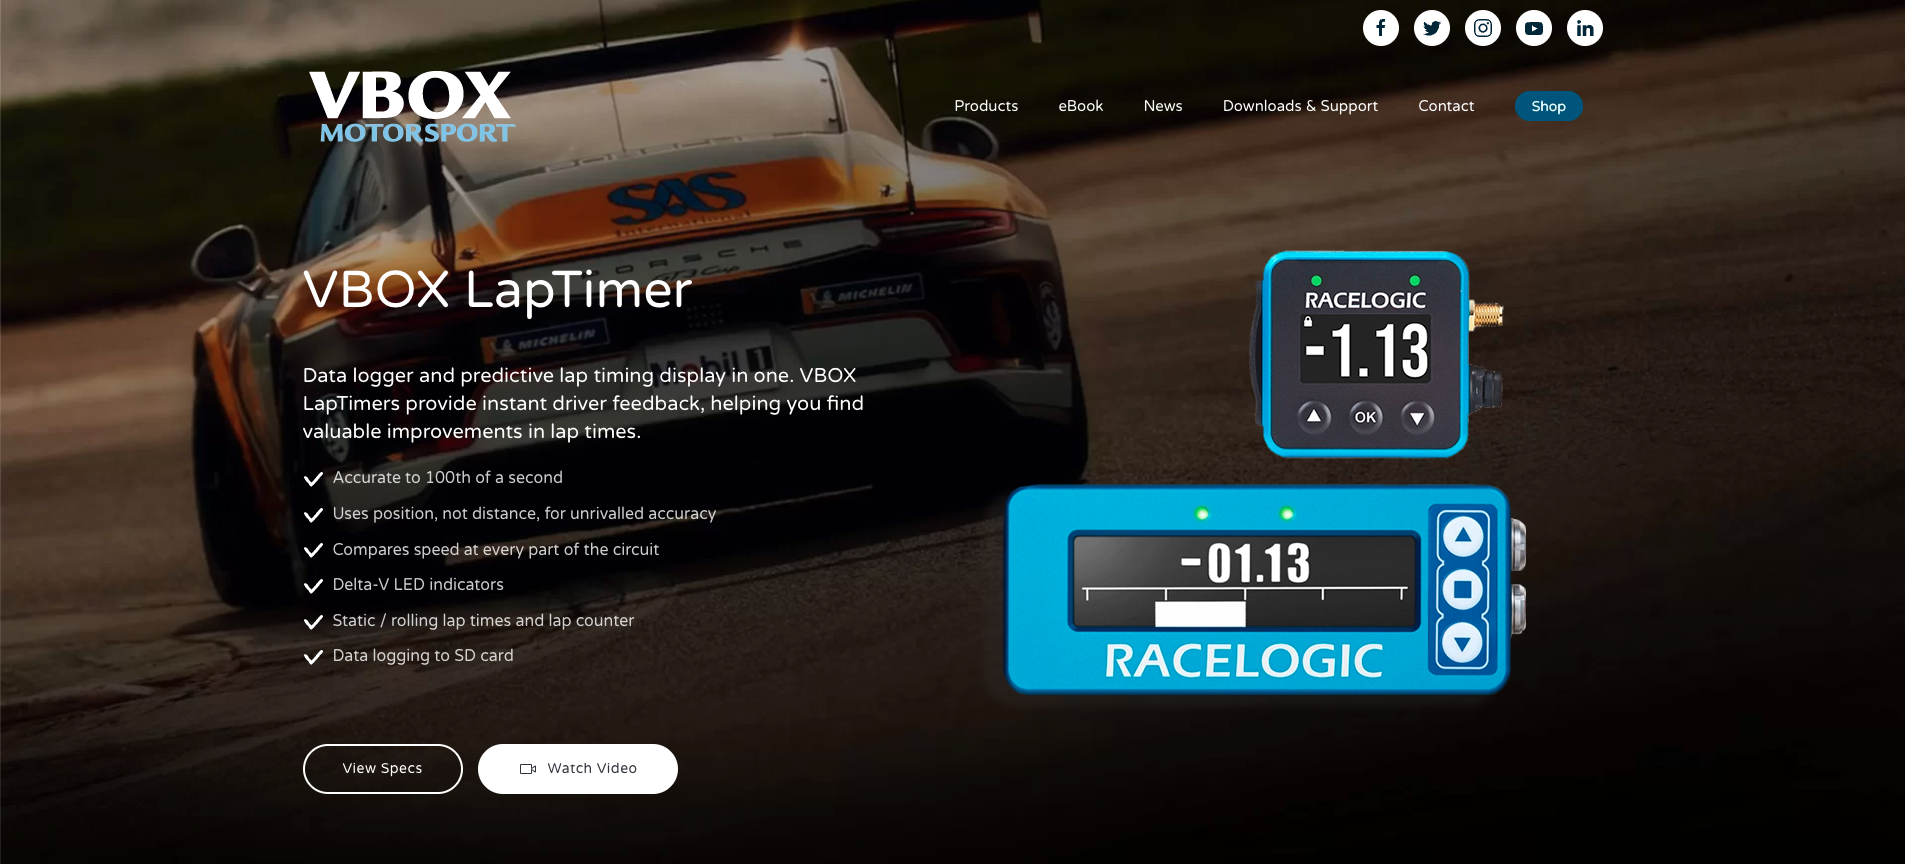 Screenshot from the VBOX motorsport website LapTimer product page.